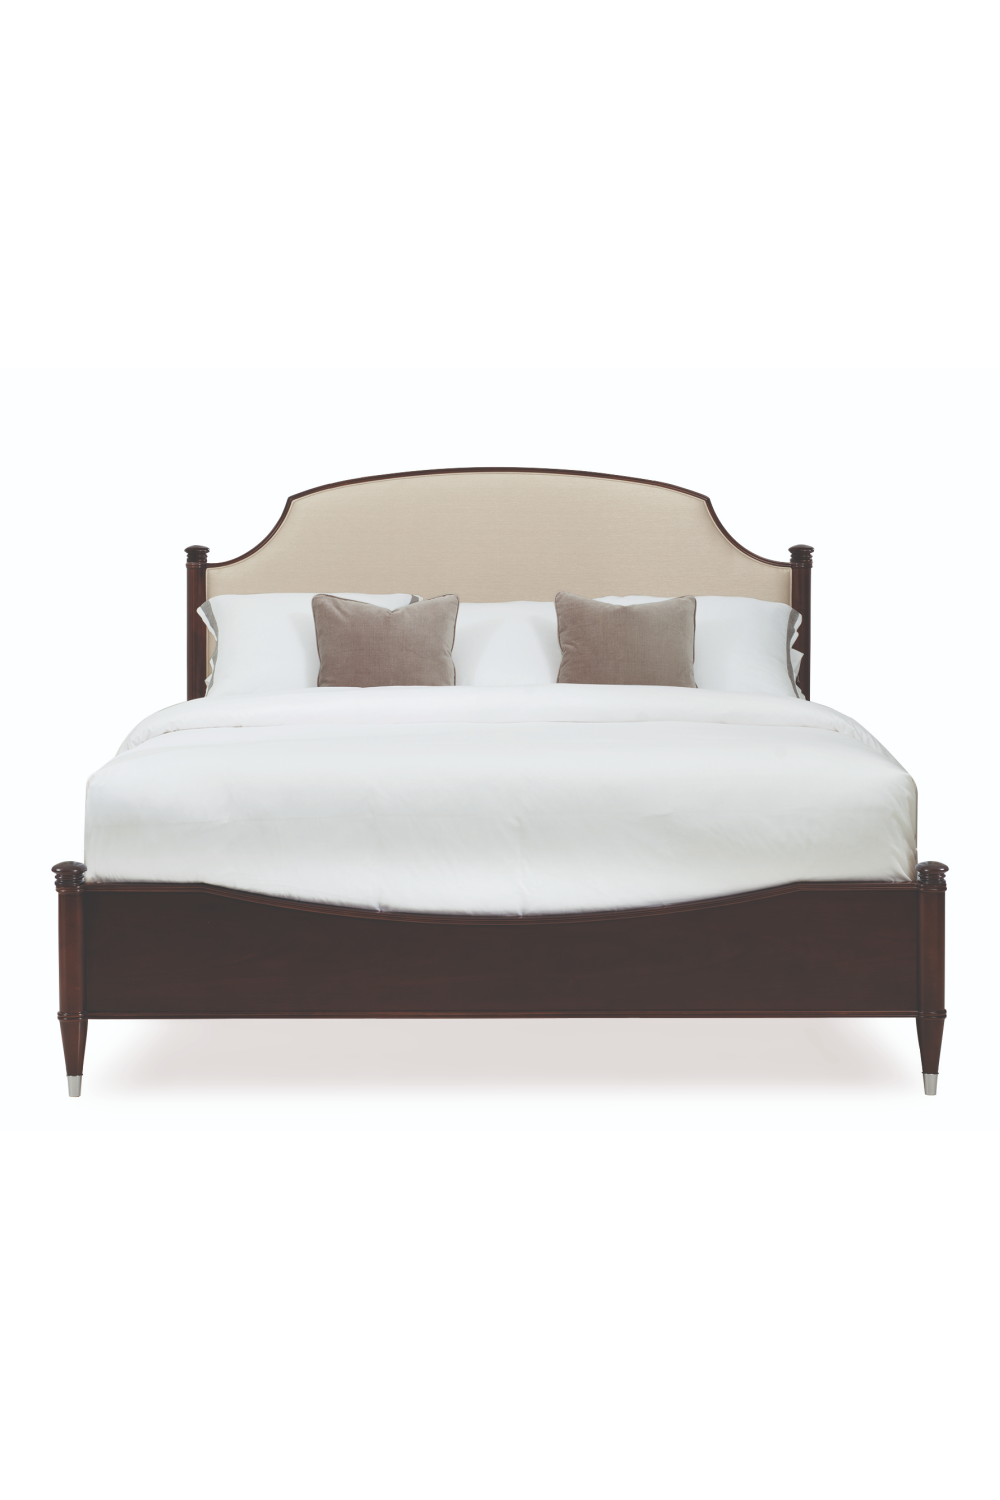 Brown Upholstered California King Bed | Caracole Crown Jewel | Oroa.com